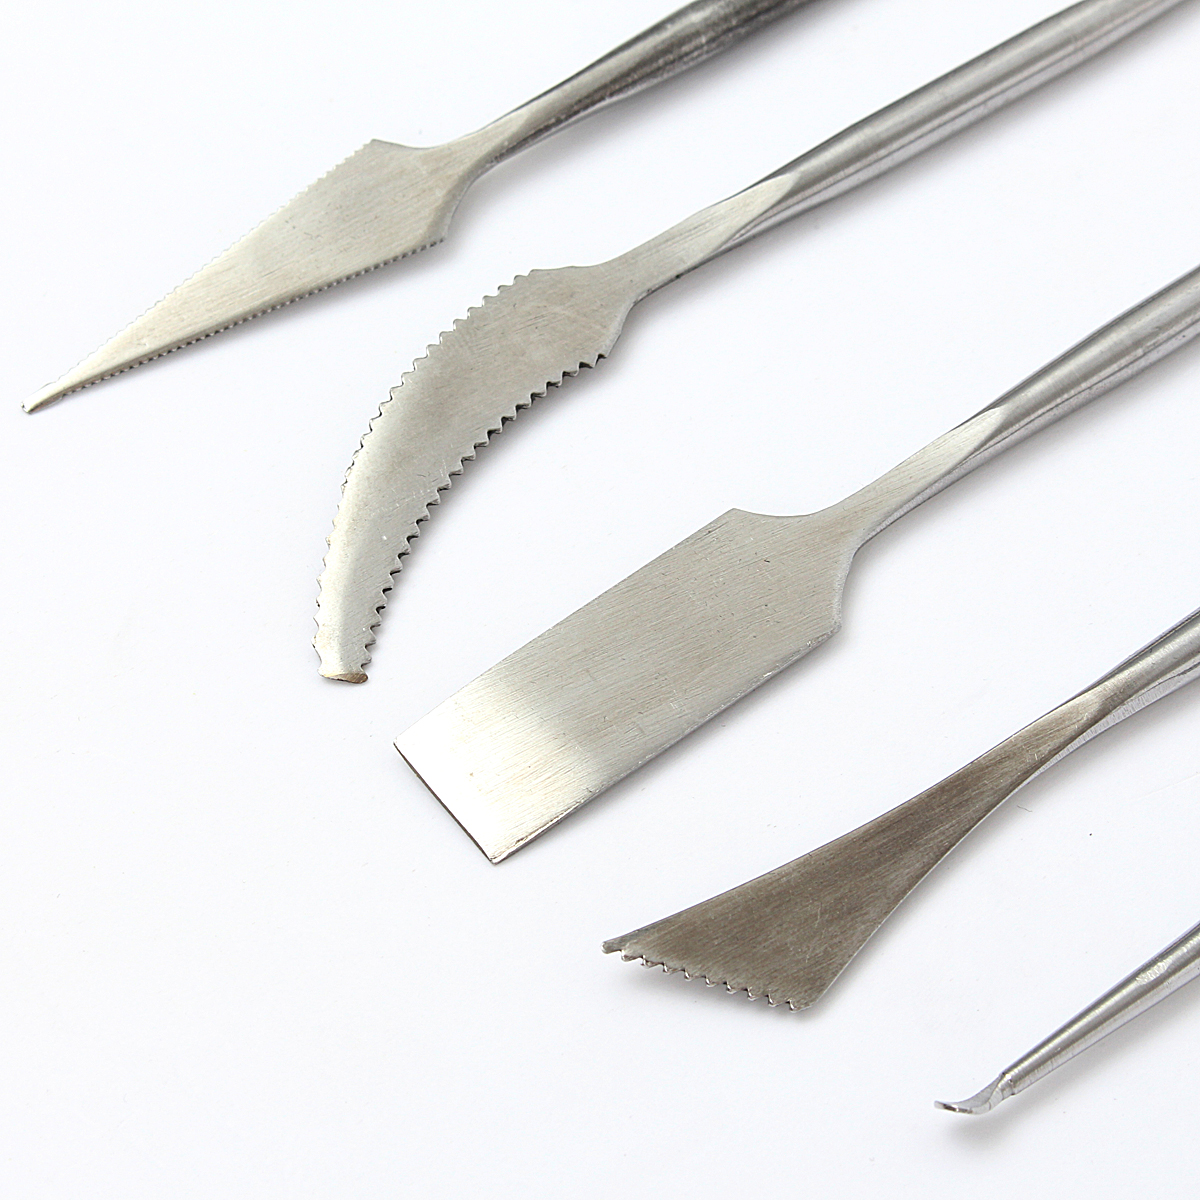 5Pcsset-Clay-Scrapers-Stainless-Steel-Clay-Sculpting-Tools-Carving-Pottery-Tools-Artist-Supplies-1771272-5